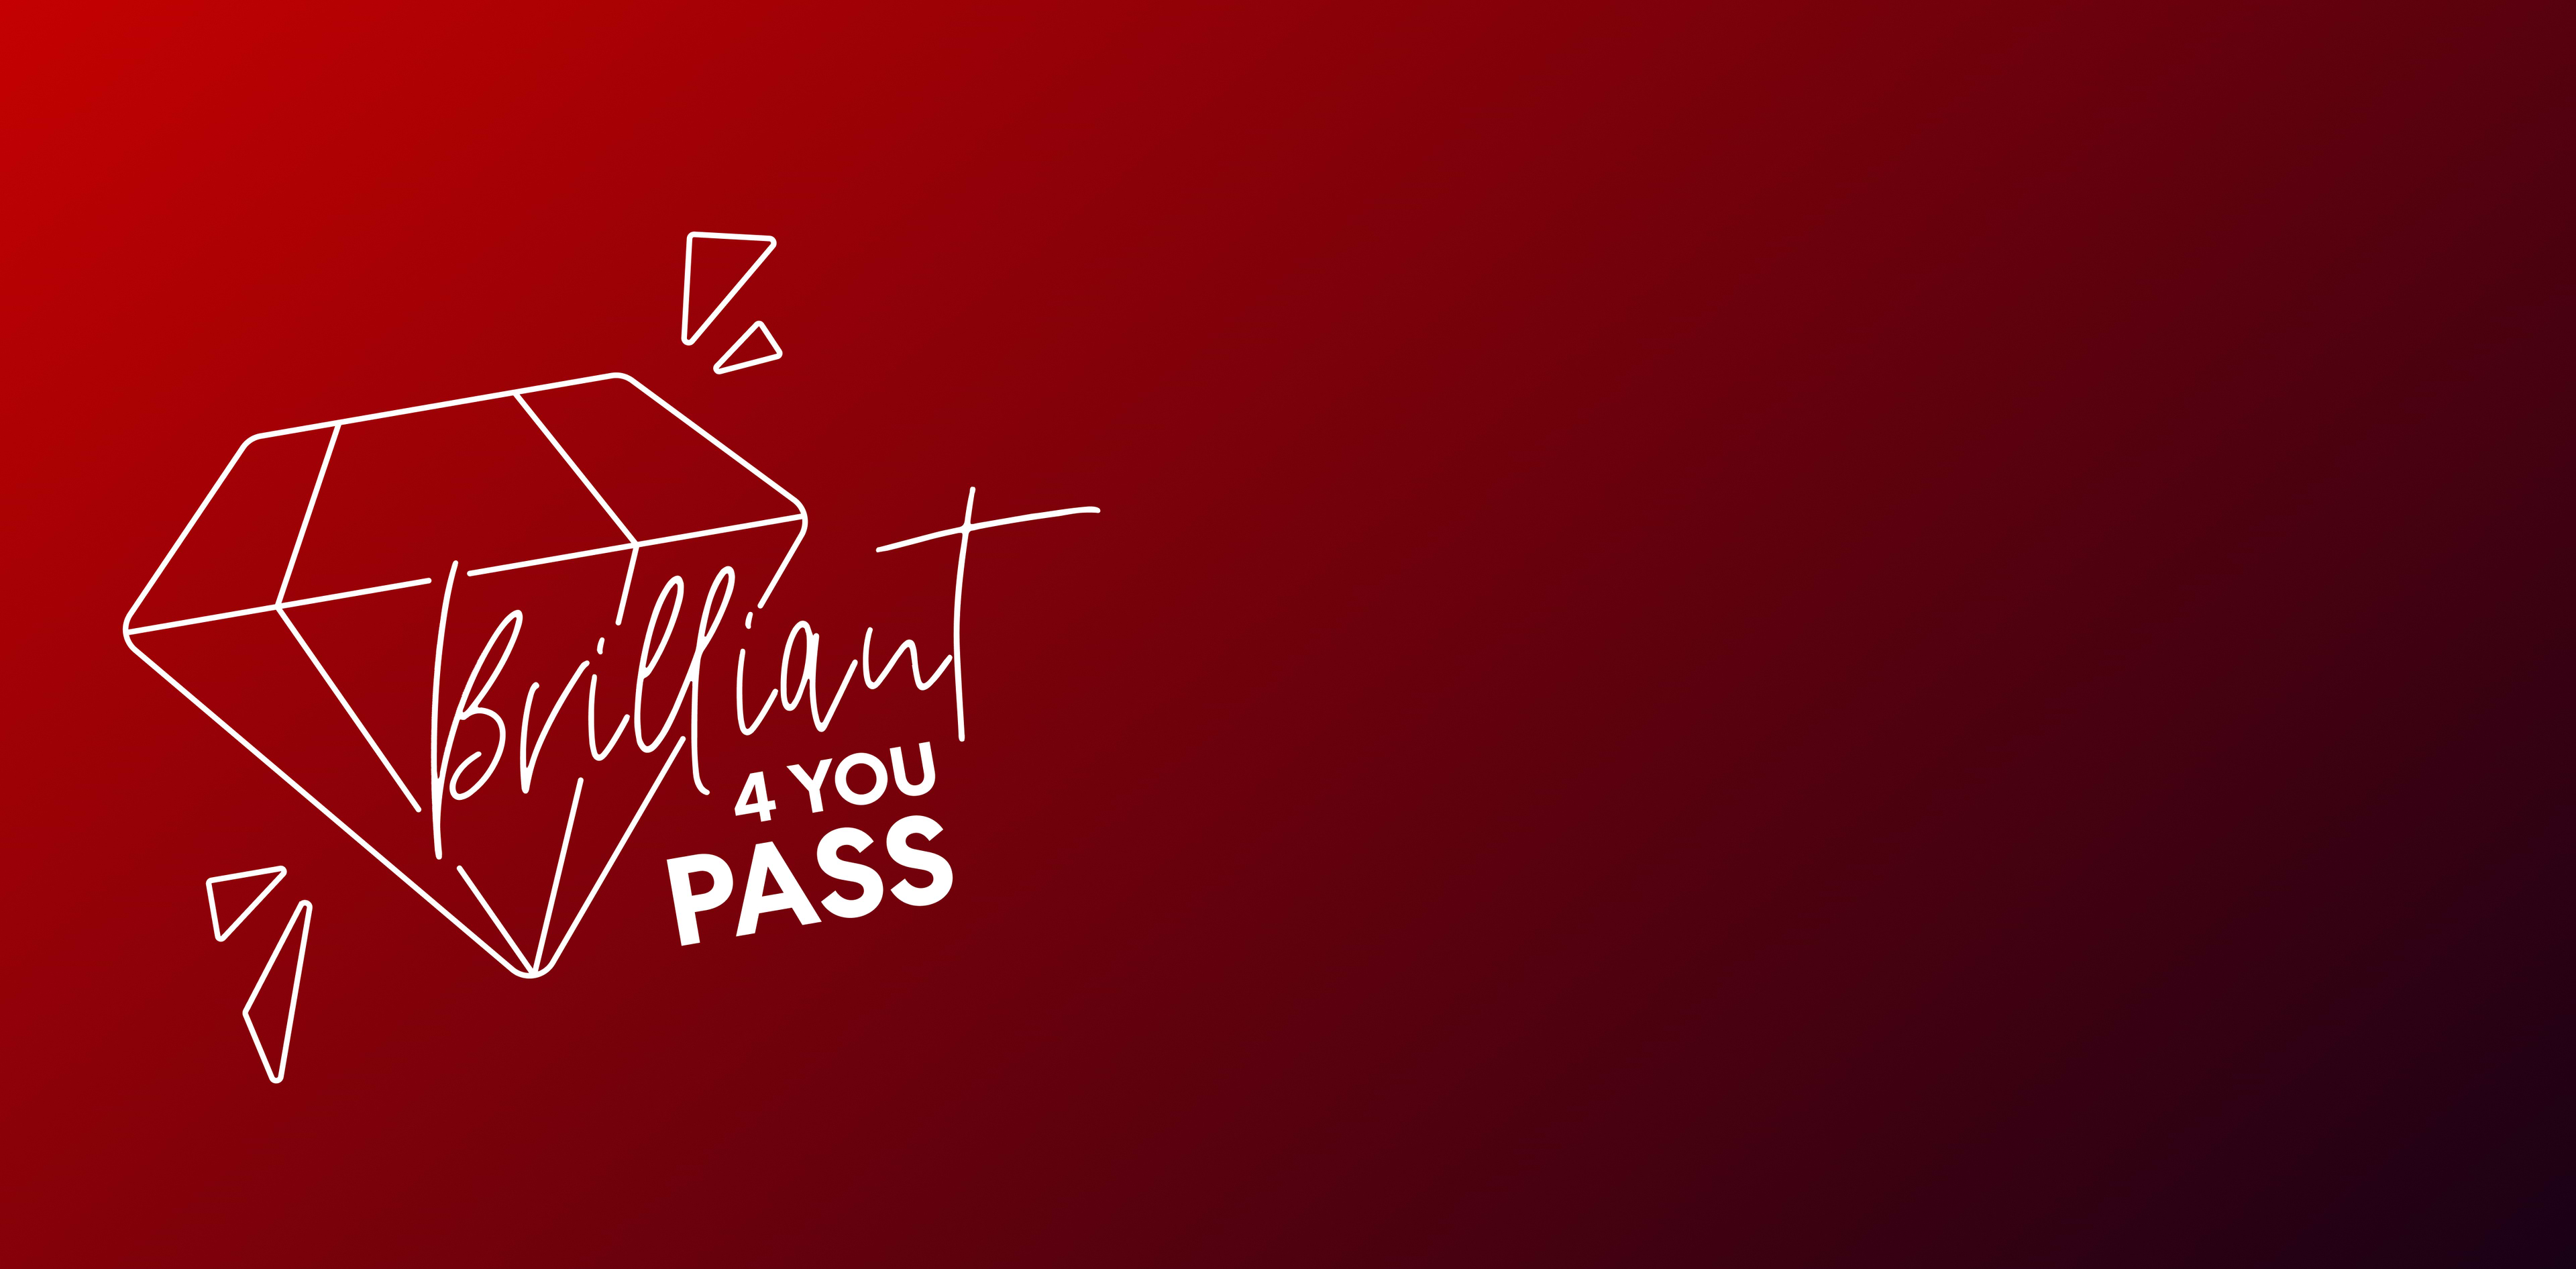 Brilliant for you pass